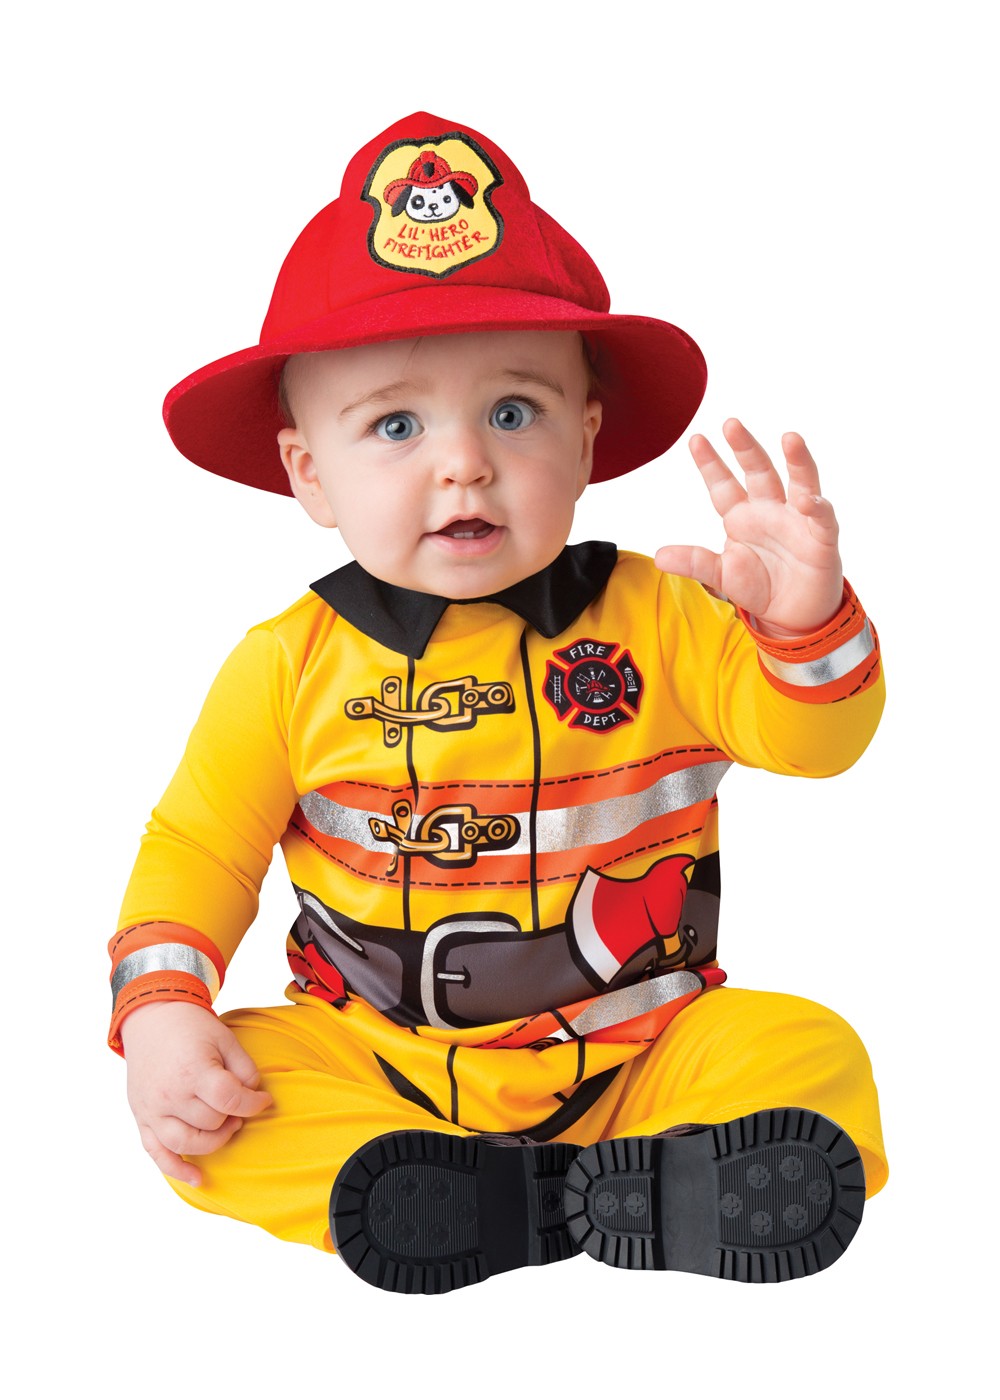 Fearless Firefighter Baby Costume